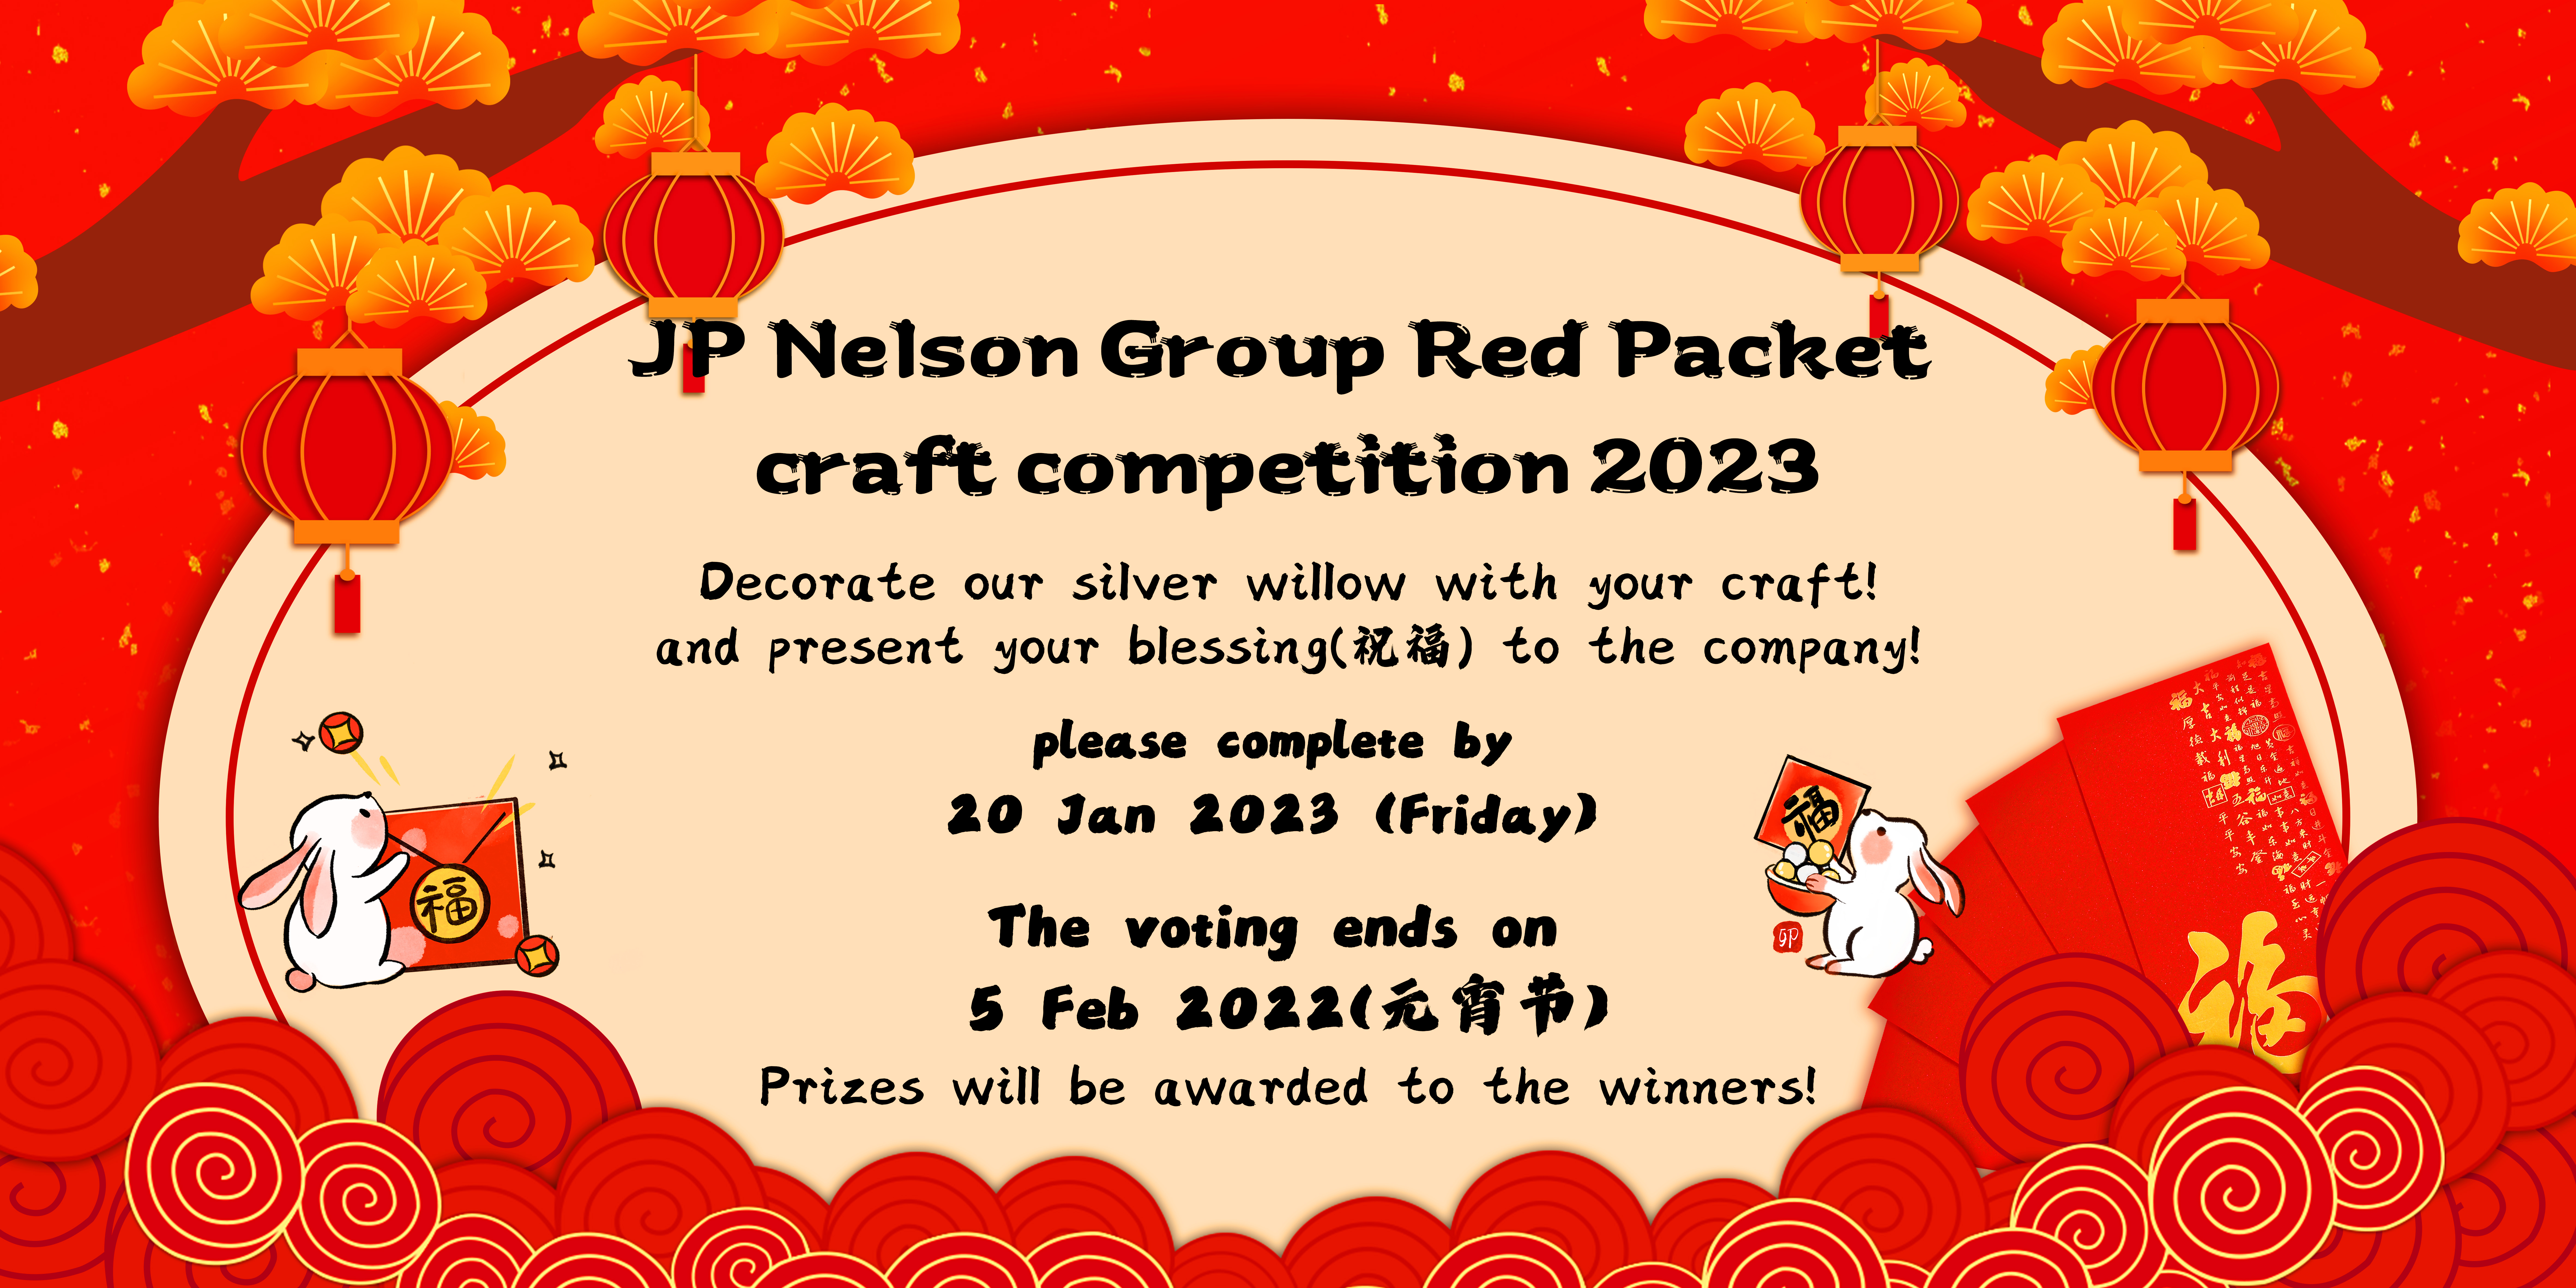 JP Nelson Group Red Packet Craft Competition 2023